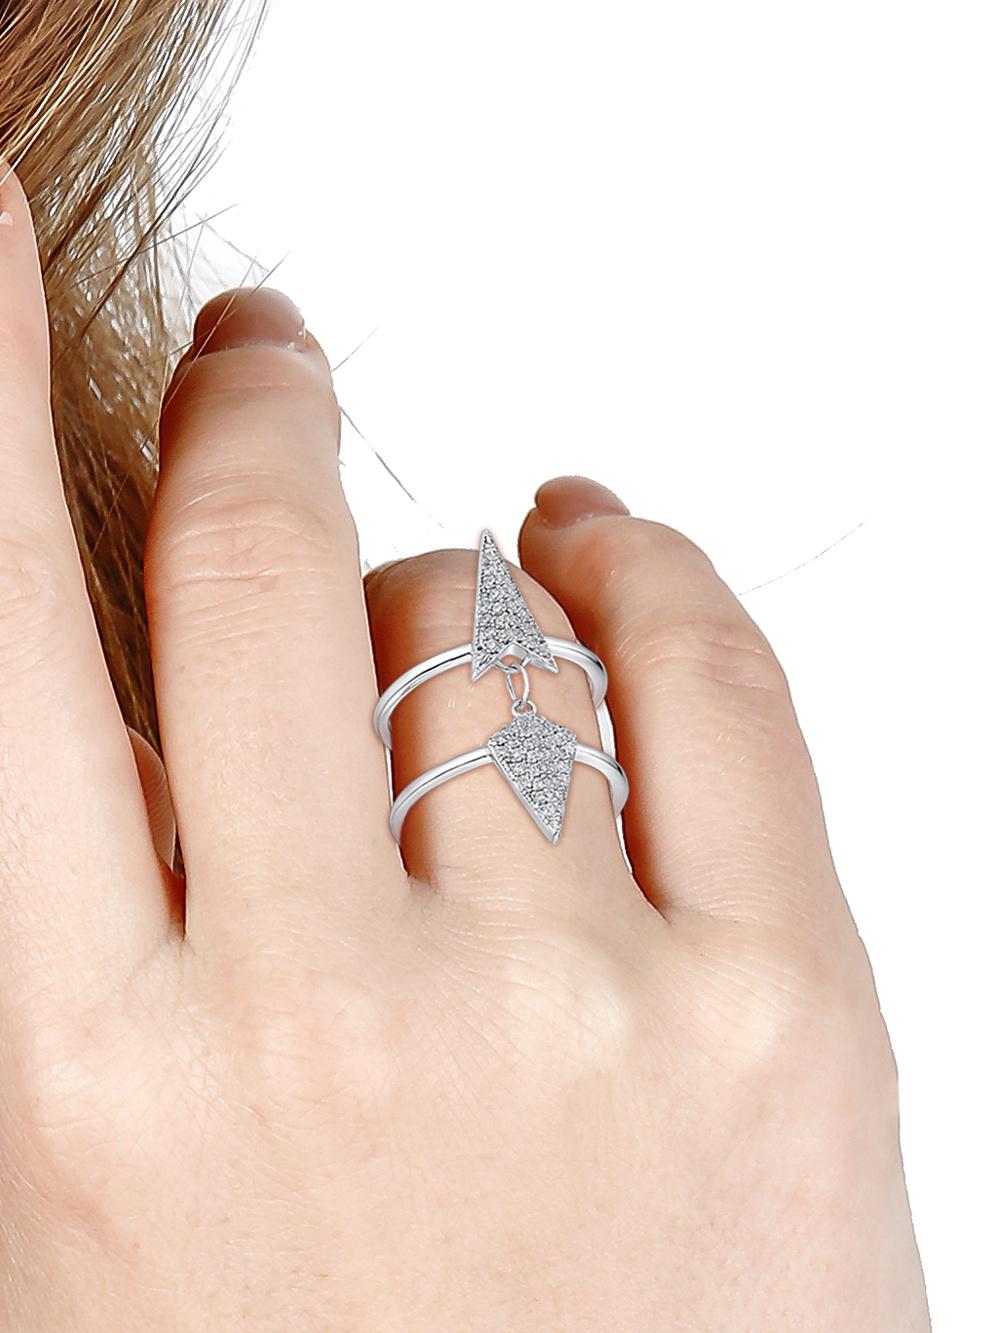 925 Sterling Silver Jewelry Rings Double layer Finger Fashion Ring with CZ Set